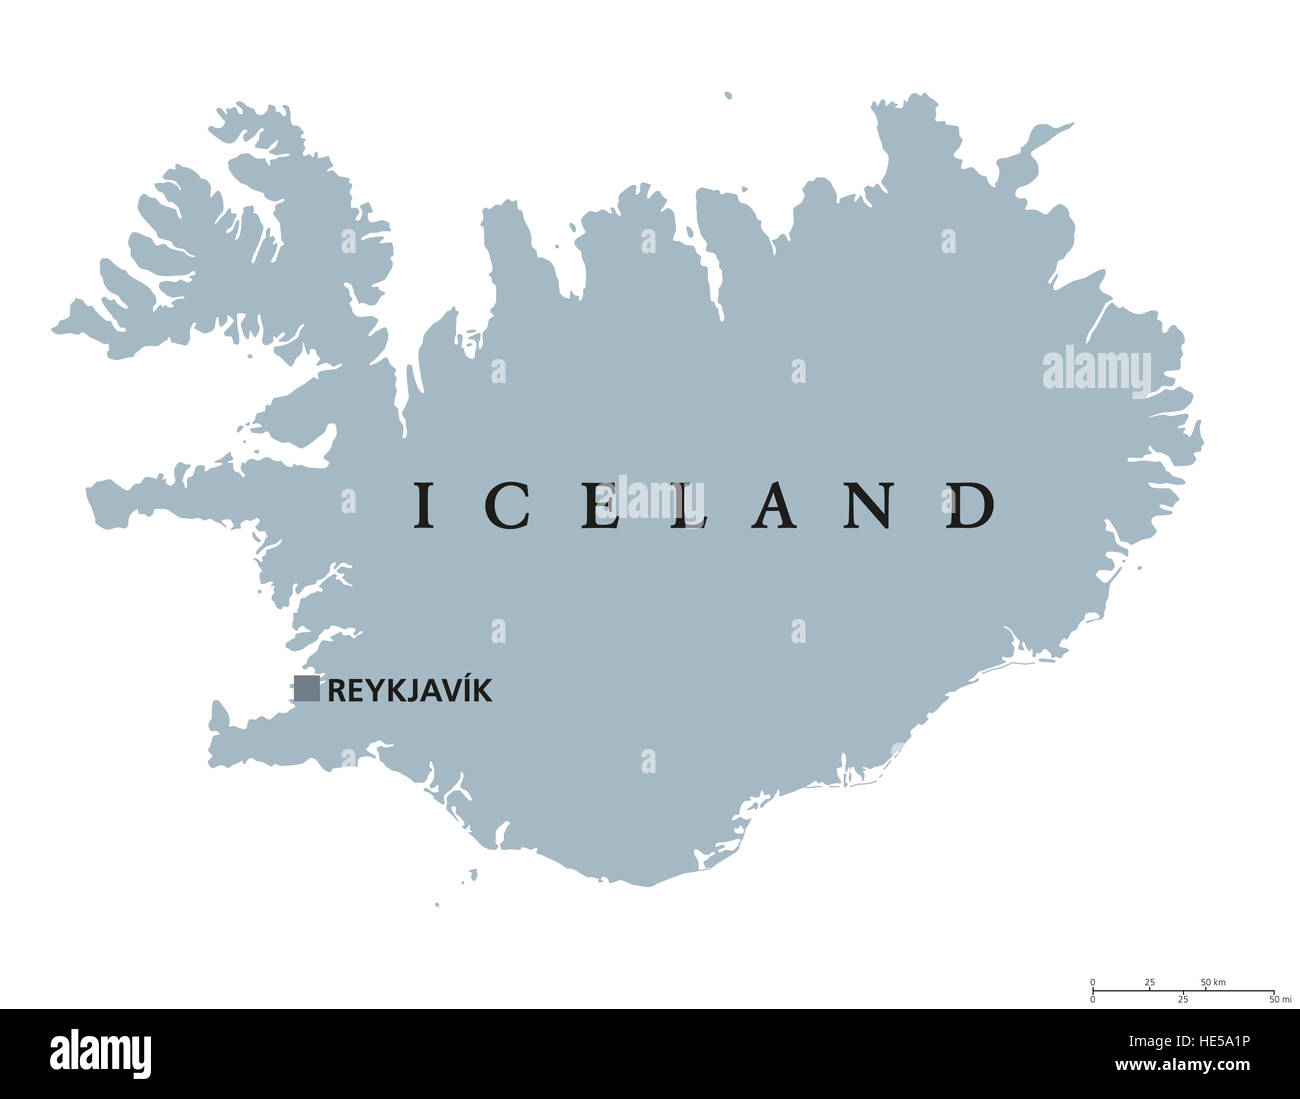 Iceland political map with capital Reykjavik. Republic and Nordic island country in Europe and the North Atlantic Ocean. Stock Photo